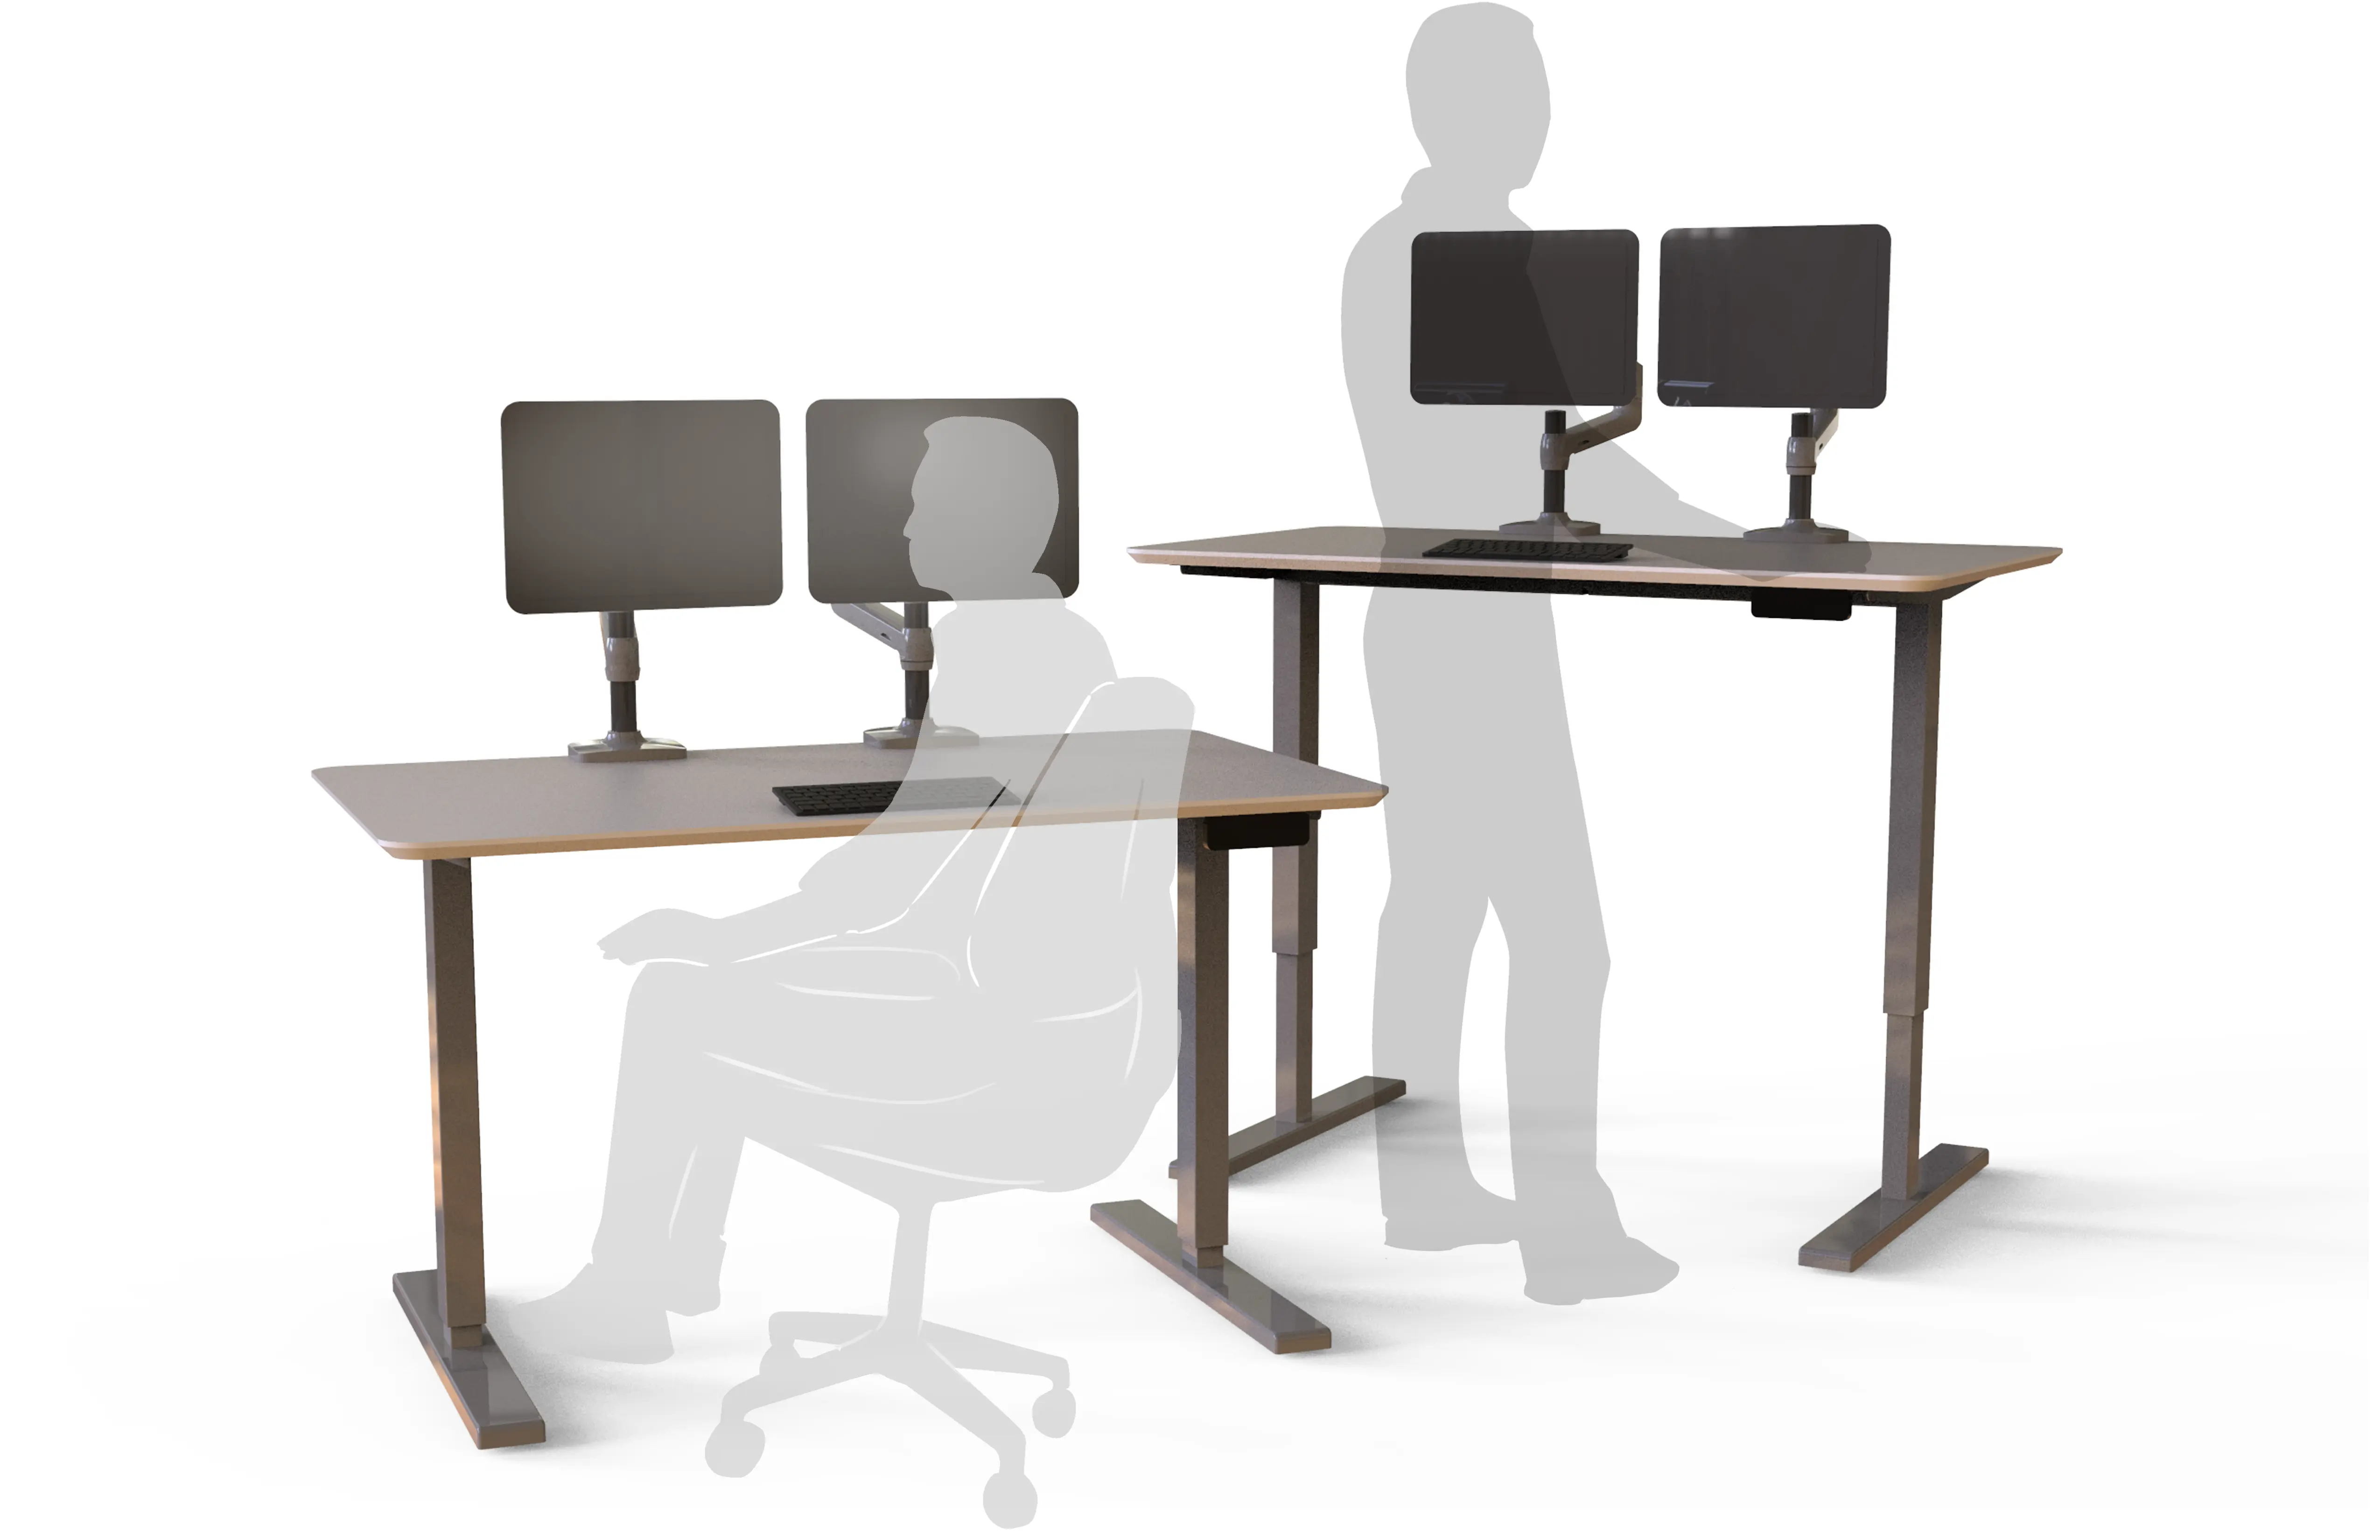 Sketches of someone sitting and standing at a desk